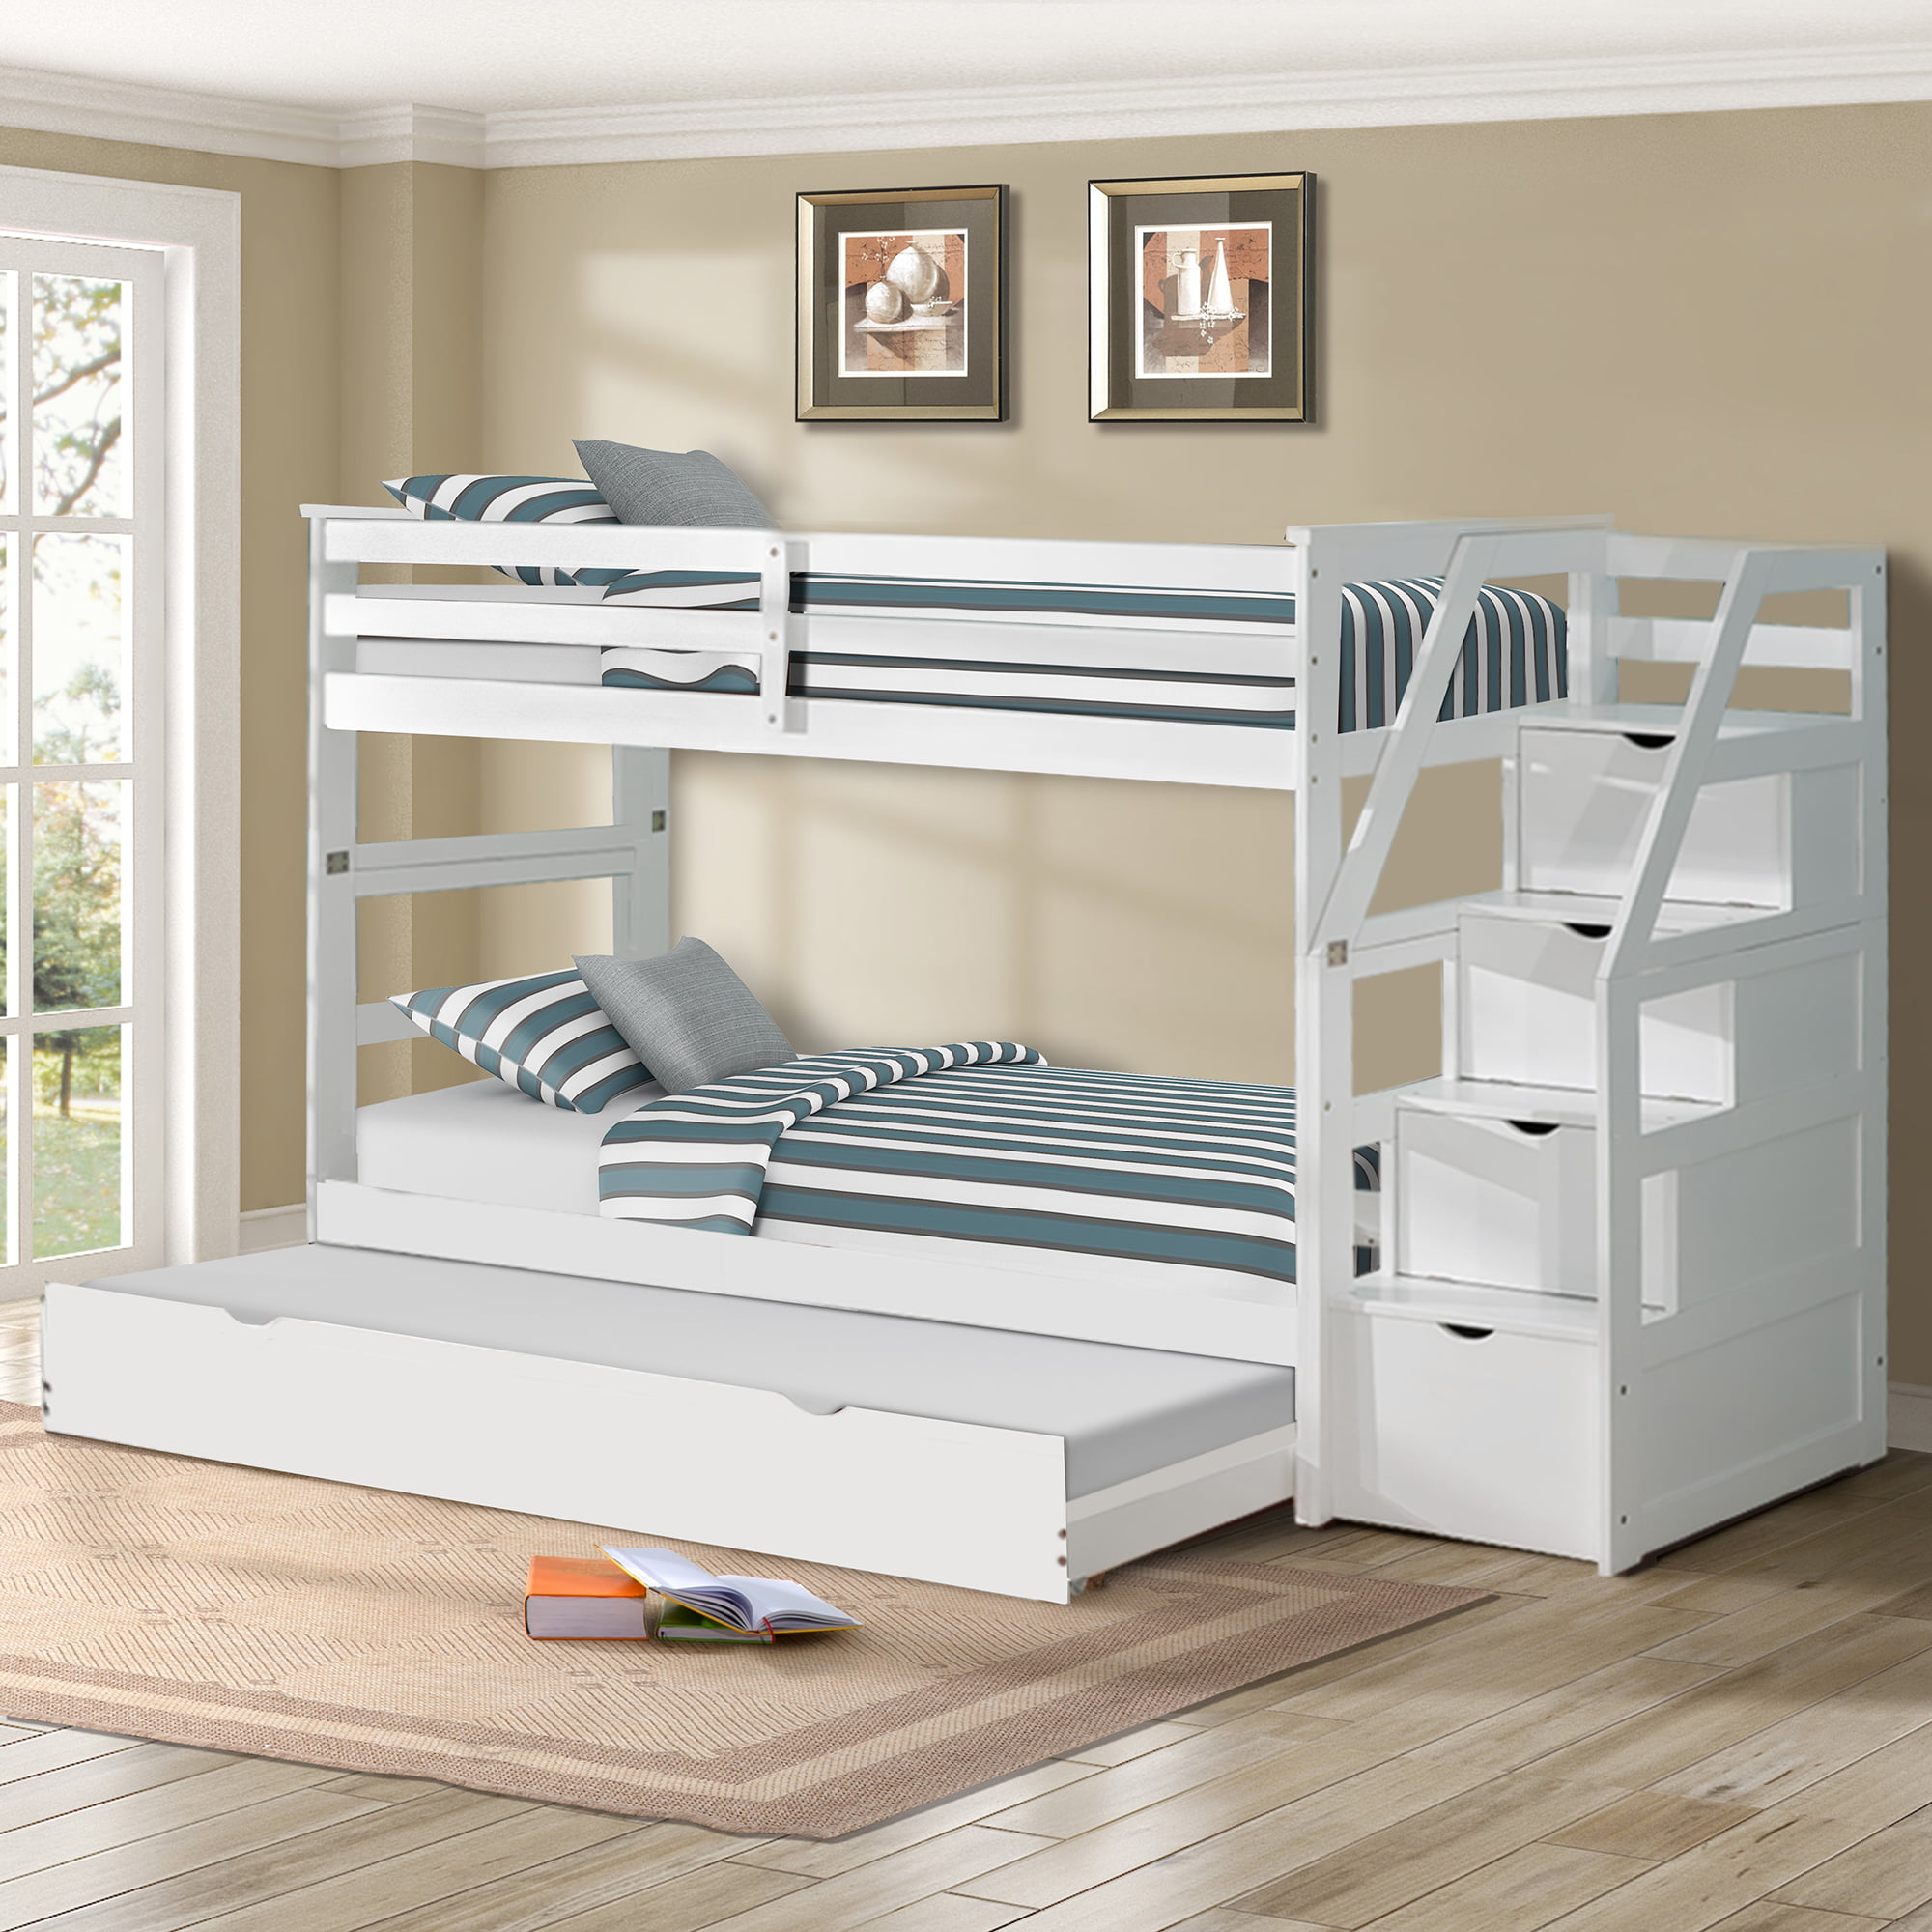 TKOOFN TwinOverTwin Trundle Bunk Bed with 4 Storage Drawers